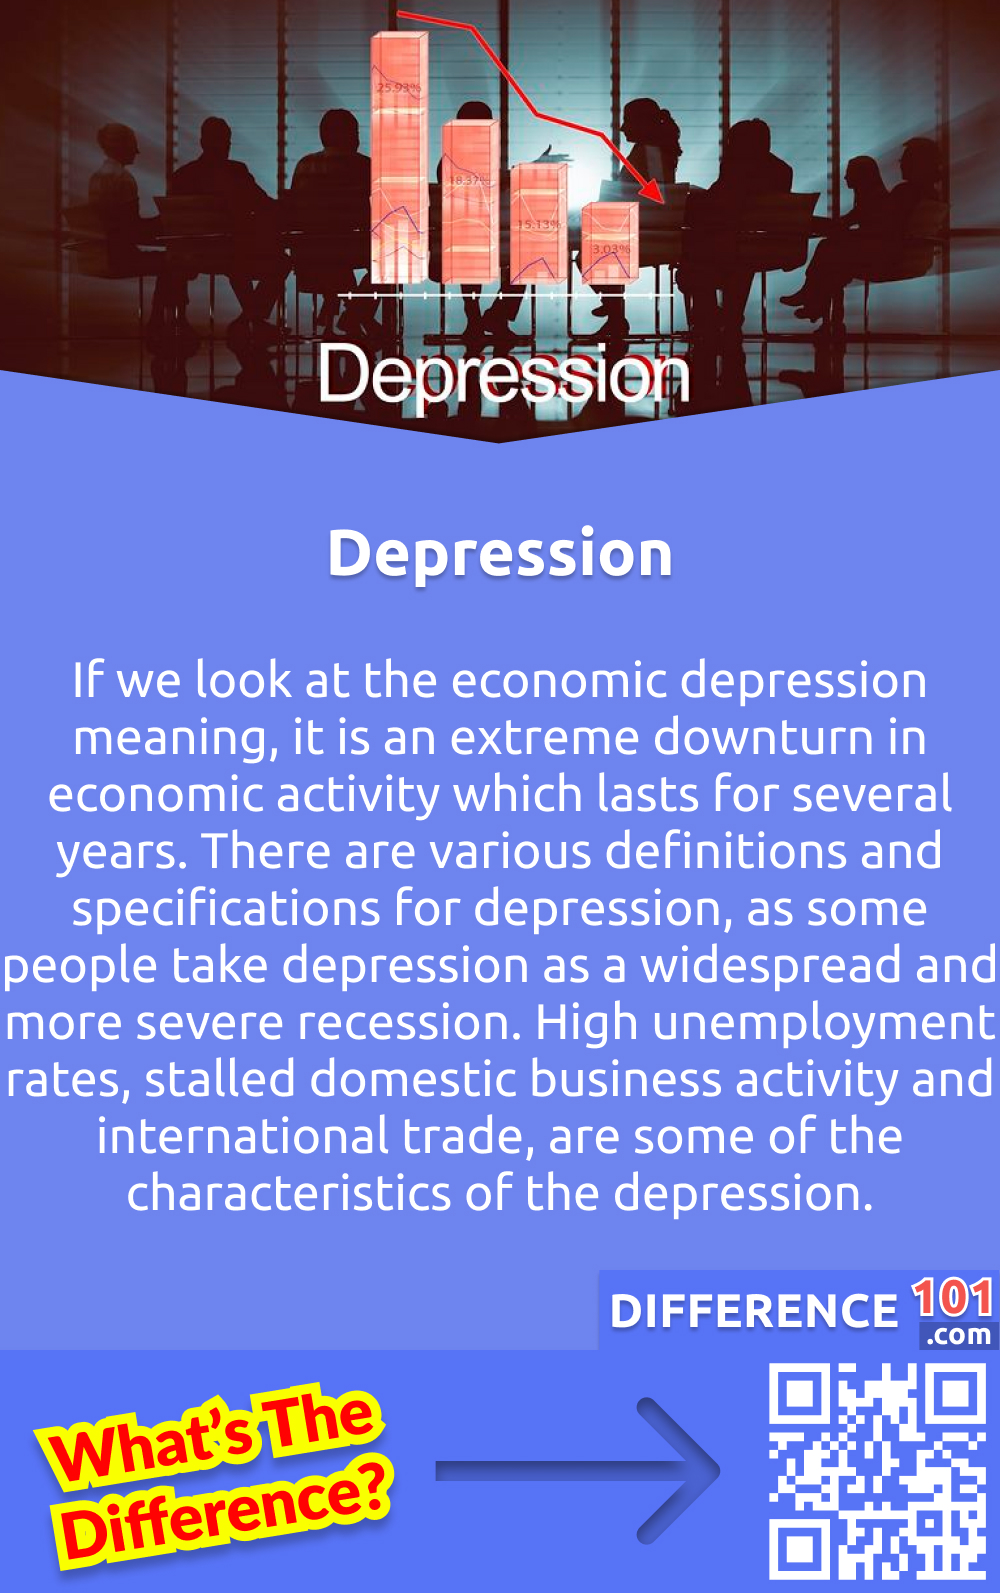 What Is Depression? If we look at the economic depression meaning, it is an extreme downturn in economic activity which lasts for several years. There are various definitions and specifications for depression, as some people take depression as a widespread and more severe recession. High unemployment rates, stalled domestic business activity and international trade, are some of the characteristics of the depression. But when we have X unemployment rate or Y GDP, we cannot say that we have an official depression. Some experts believe that depression lasts only when economic activity is declining, while the common understanding is that depression lasts until economic activity has returned to its normal levels.